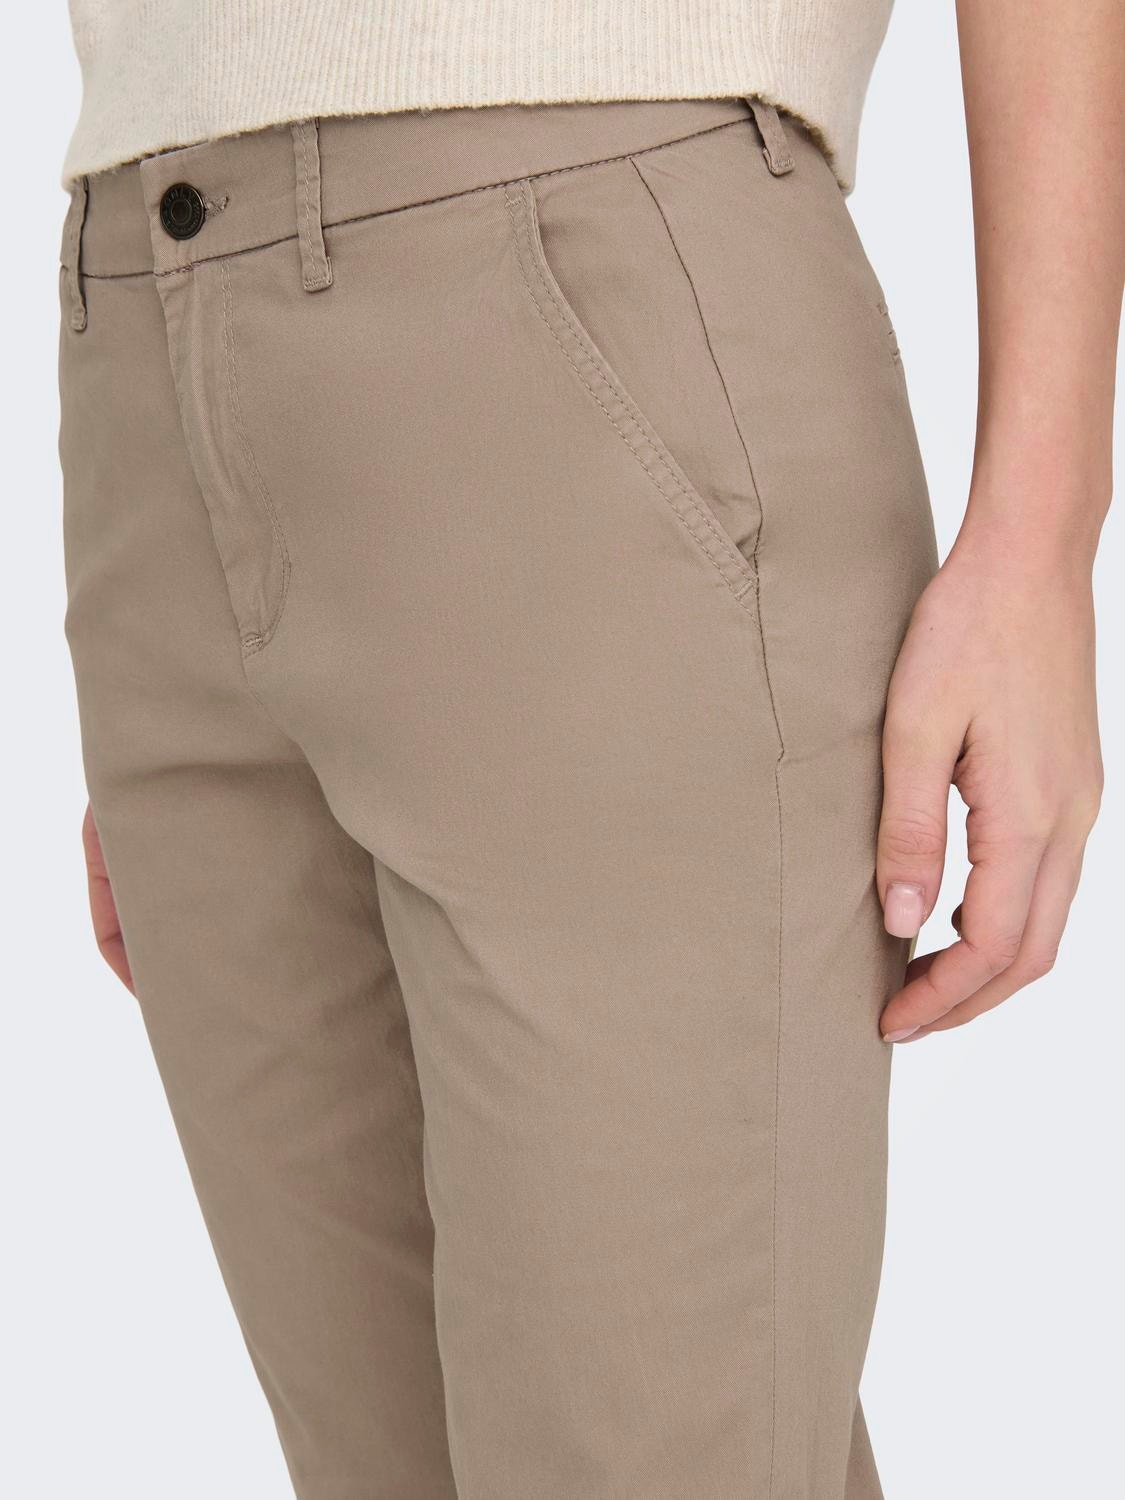 ONLY Slim Fit Trousers -Silver Mink - 15200641